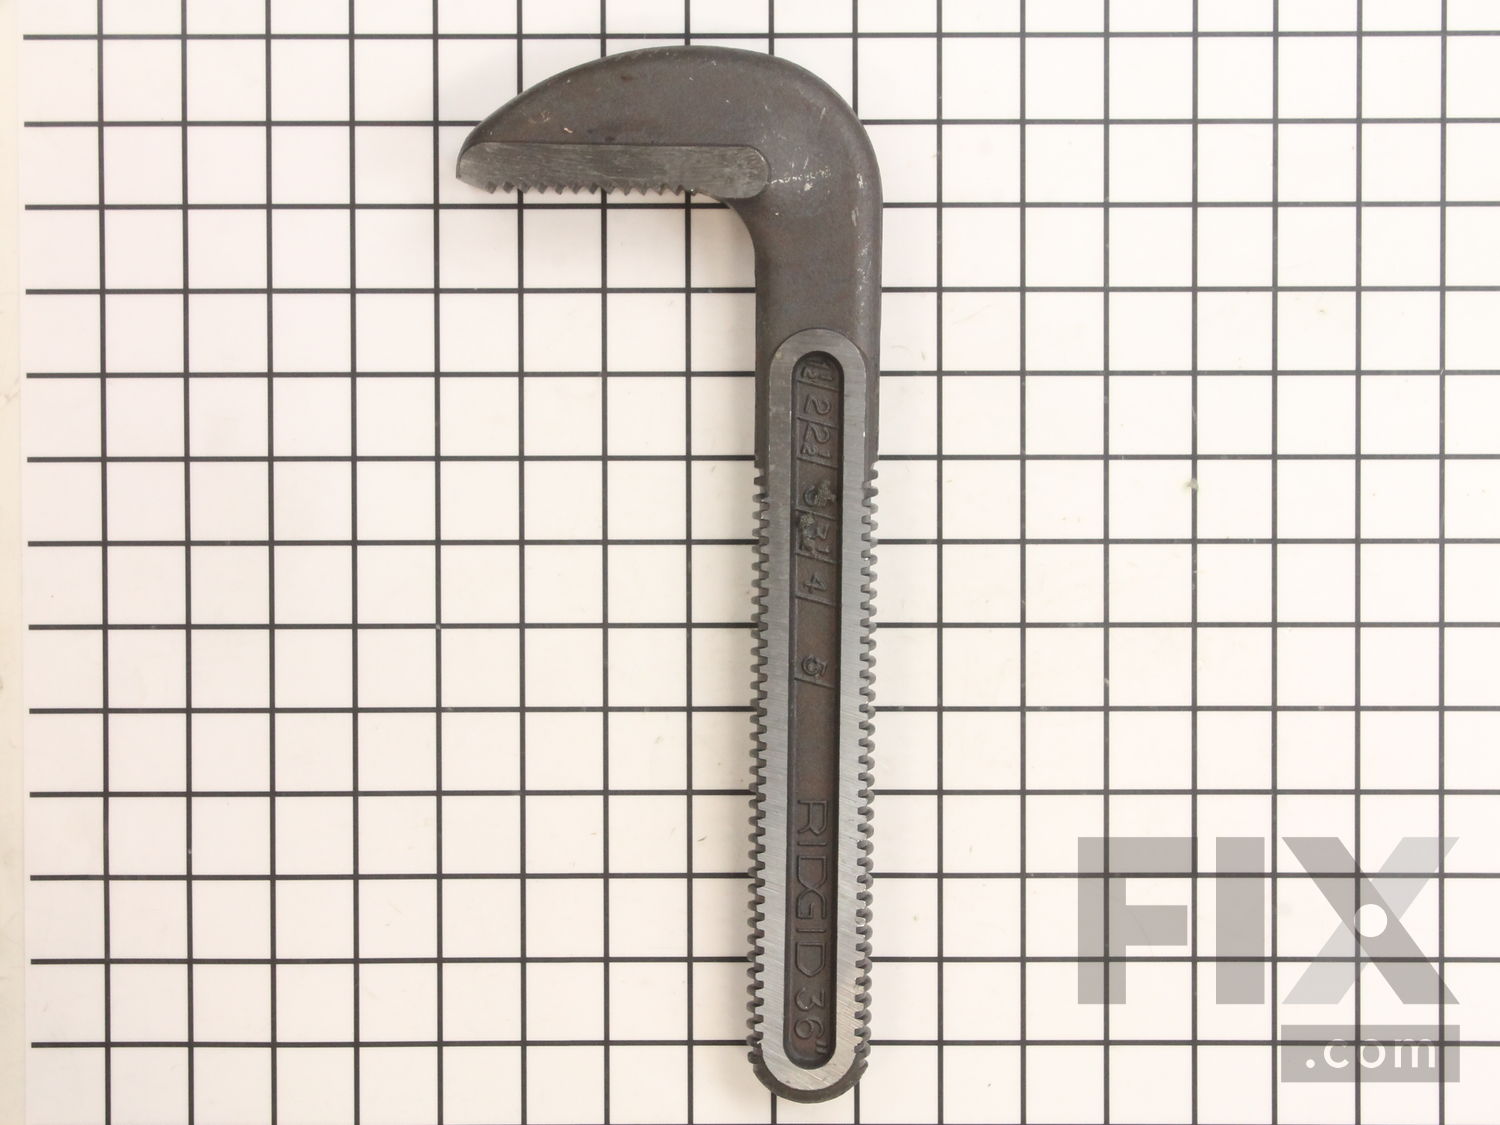 Ridgid 31720 36" Pipe Wrench Hook Jaw OEM Replacement